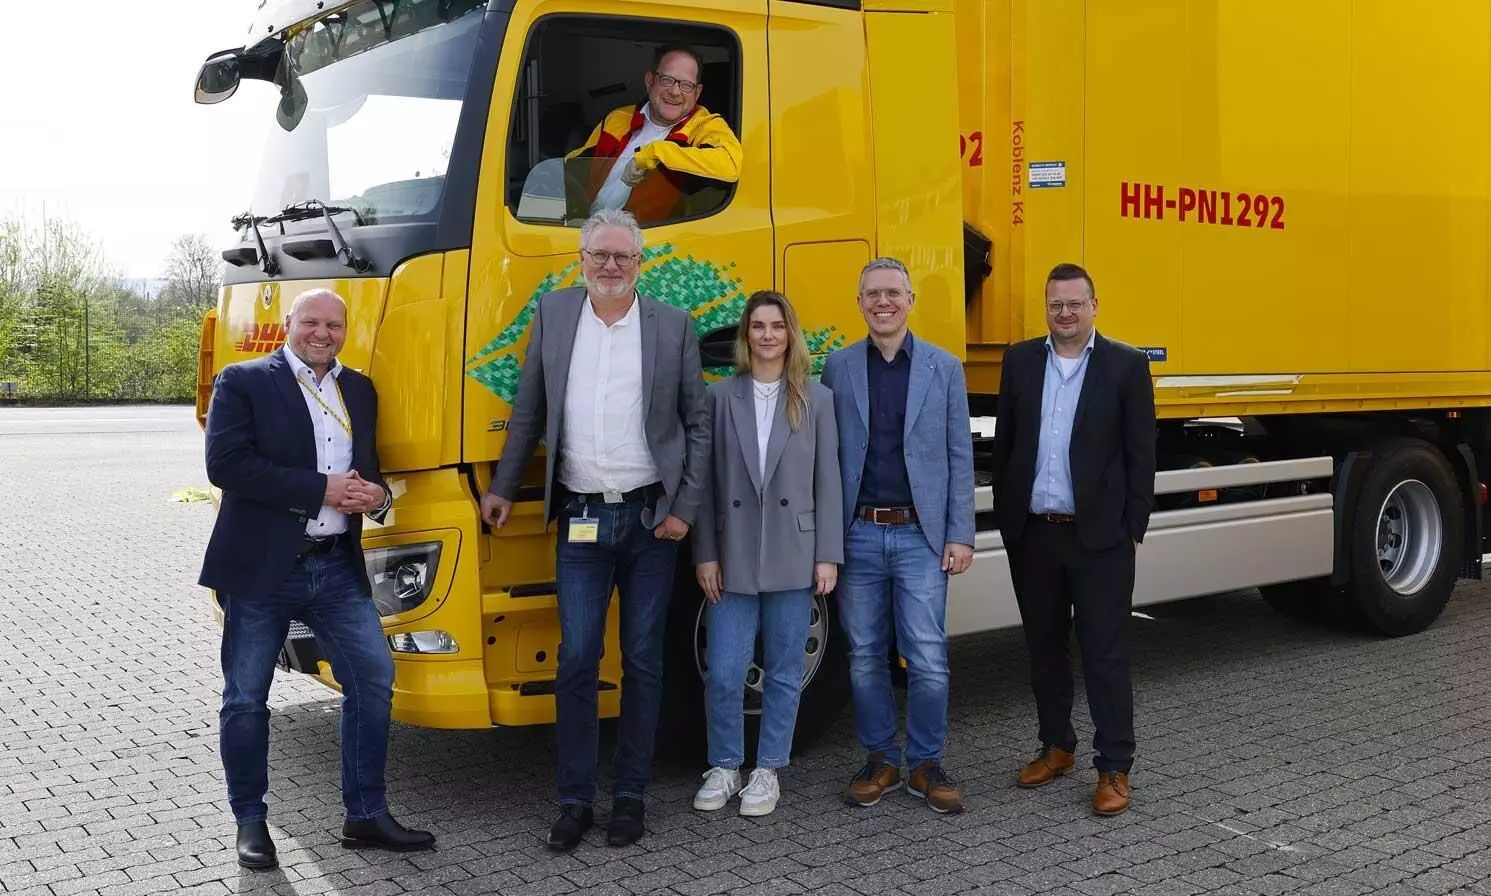 (l-r) Christian Todt, branch manager DHL Freight Menden/Hagen, Wolfgang Schwarz, area manager west DHL Freight, Thomas Vogel, CEO DACH, UK & IE DHL Freight, Raffaela Jung, inbound logistics network planning at Mercedes-Benz Trucks, Oliver Berger, manager network strategies and sustainability Inbound logistics at Mercedes-Benz Trucks, Klaus-Uwe Festtag, branch manager DHL Freight Koblenz.